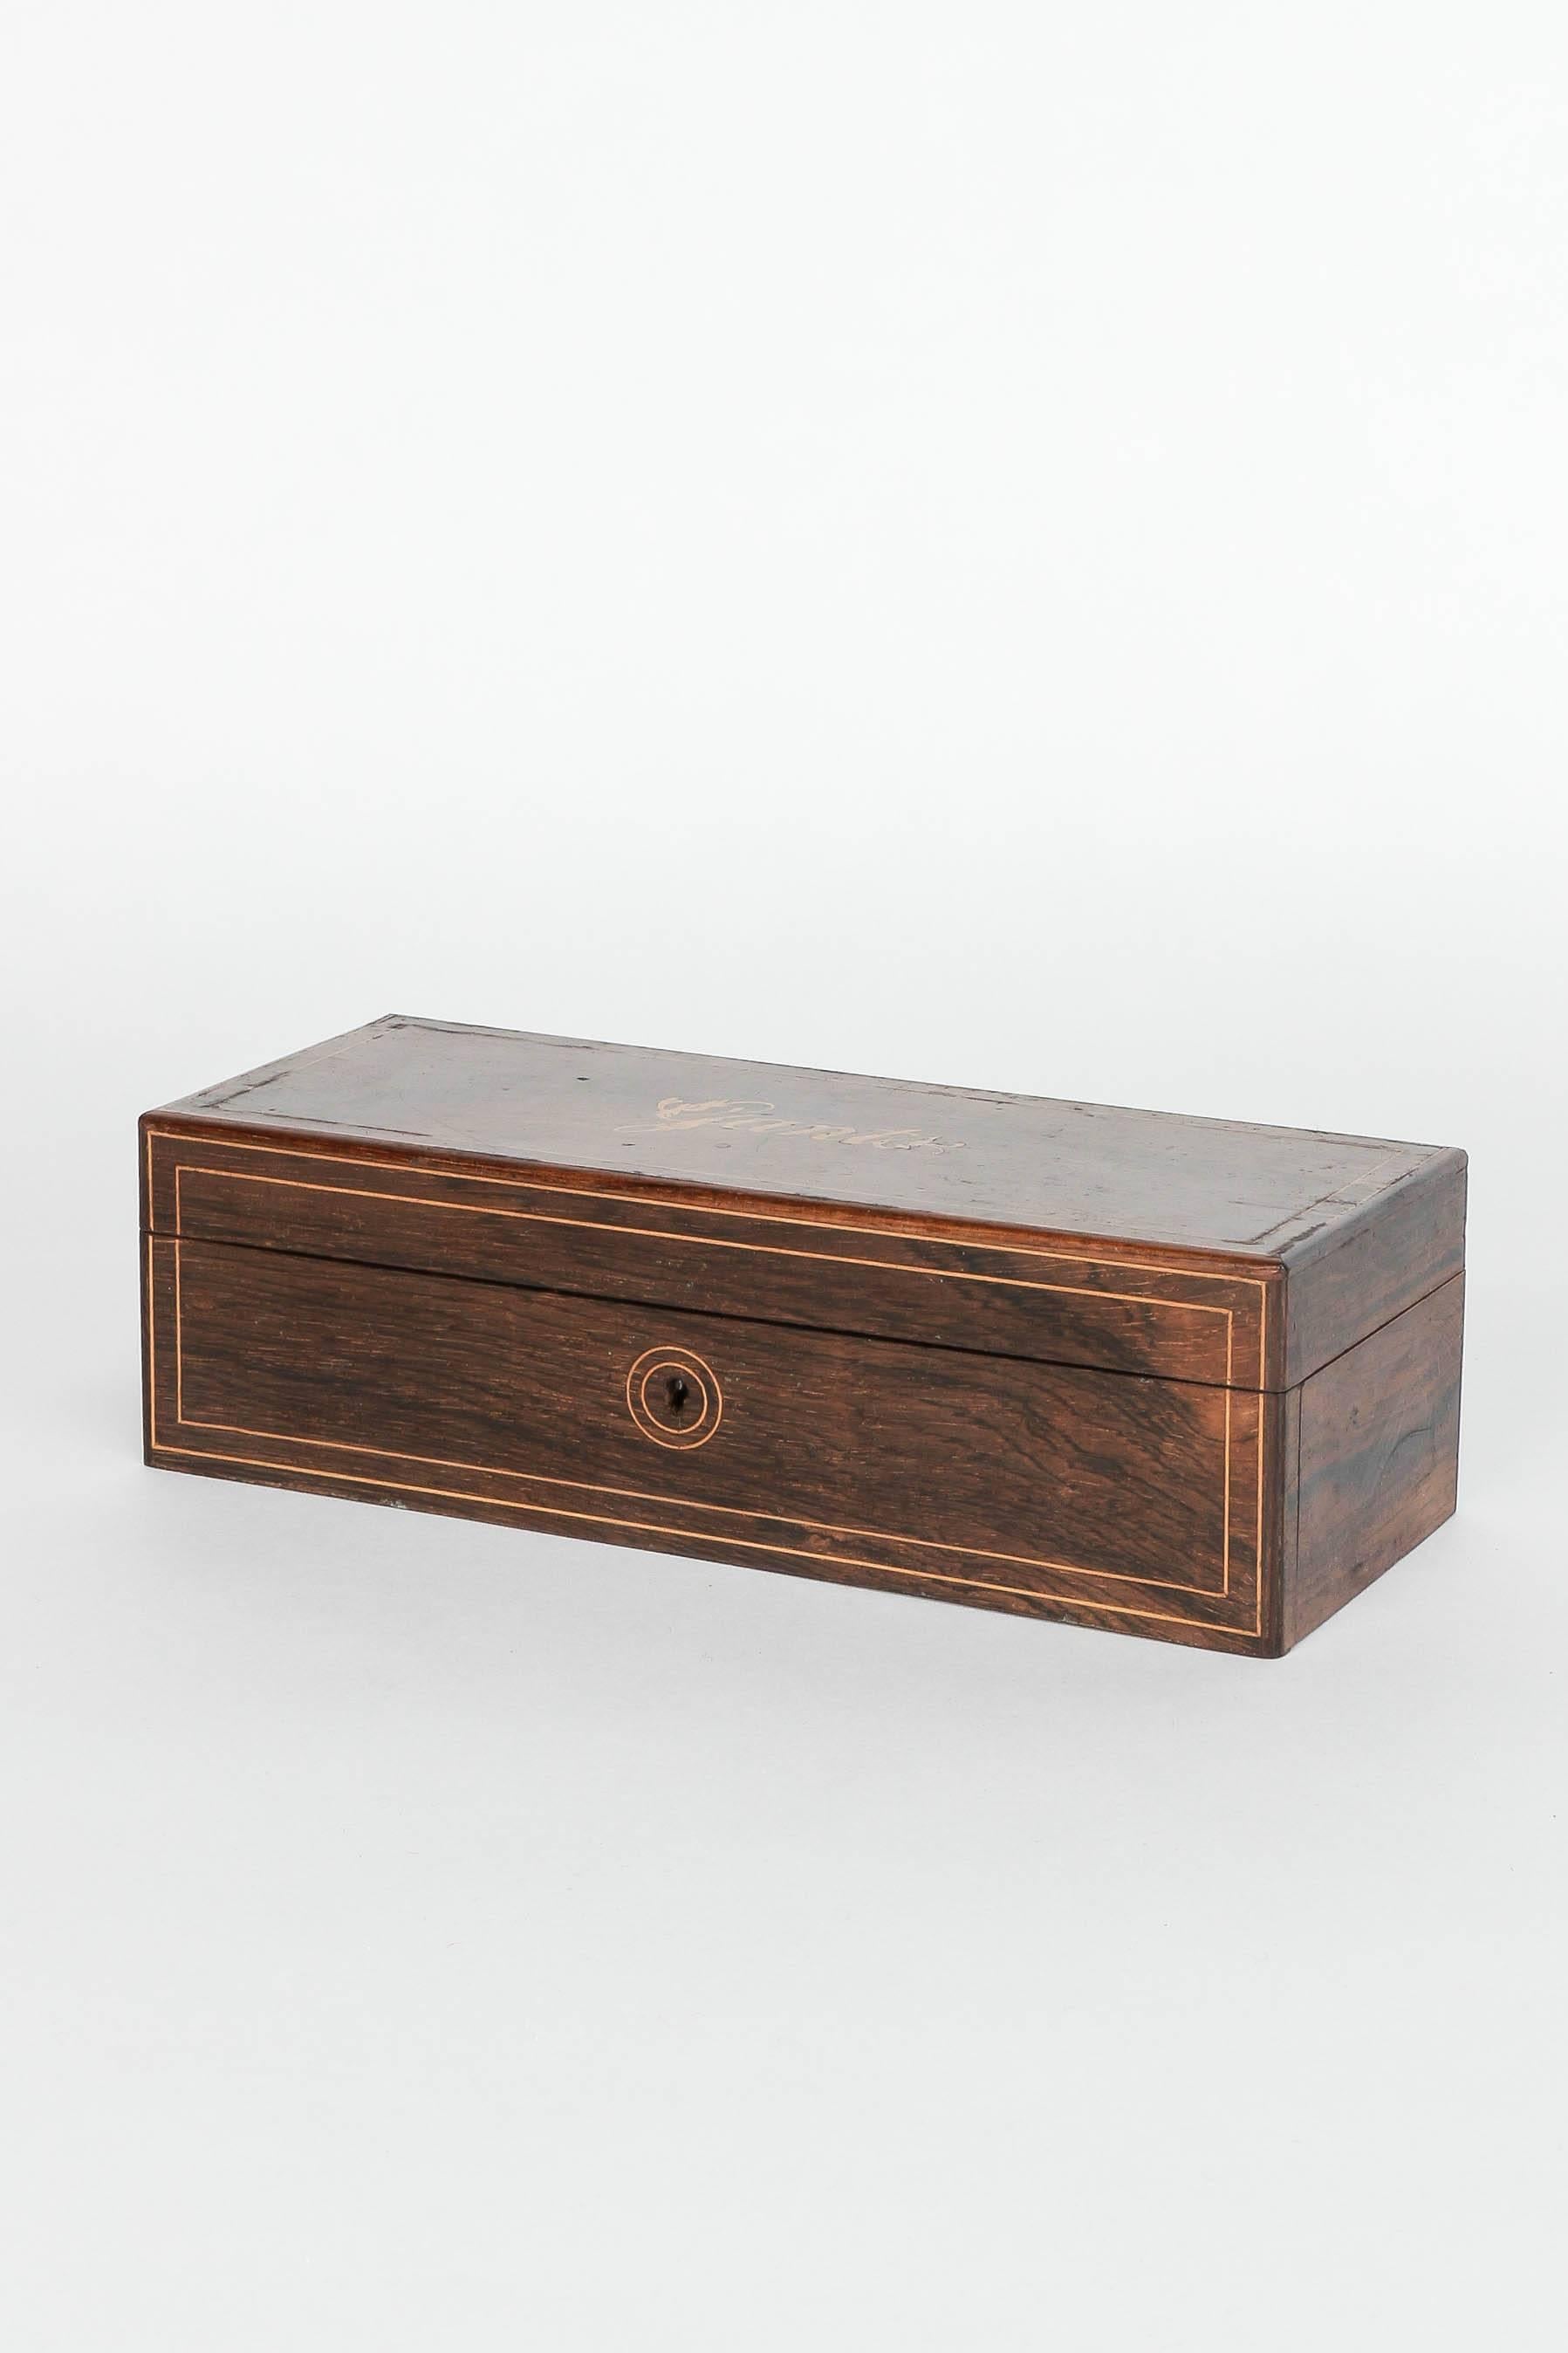 Incredible French glove box made of rosewood, interior is made of birds eye maple. Manufactured in France, circa 1870. Brass hinges and fine inlays made of lemon wood with the lettering 